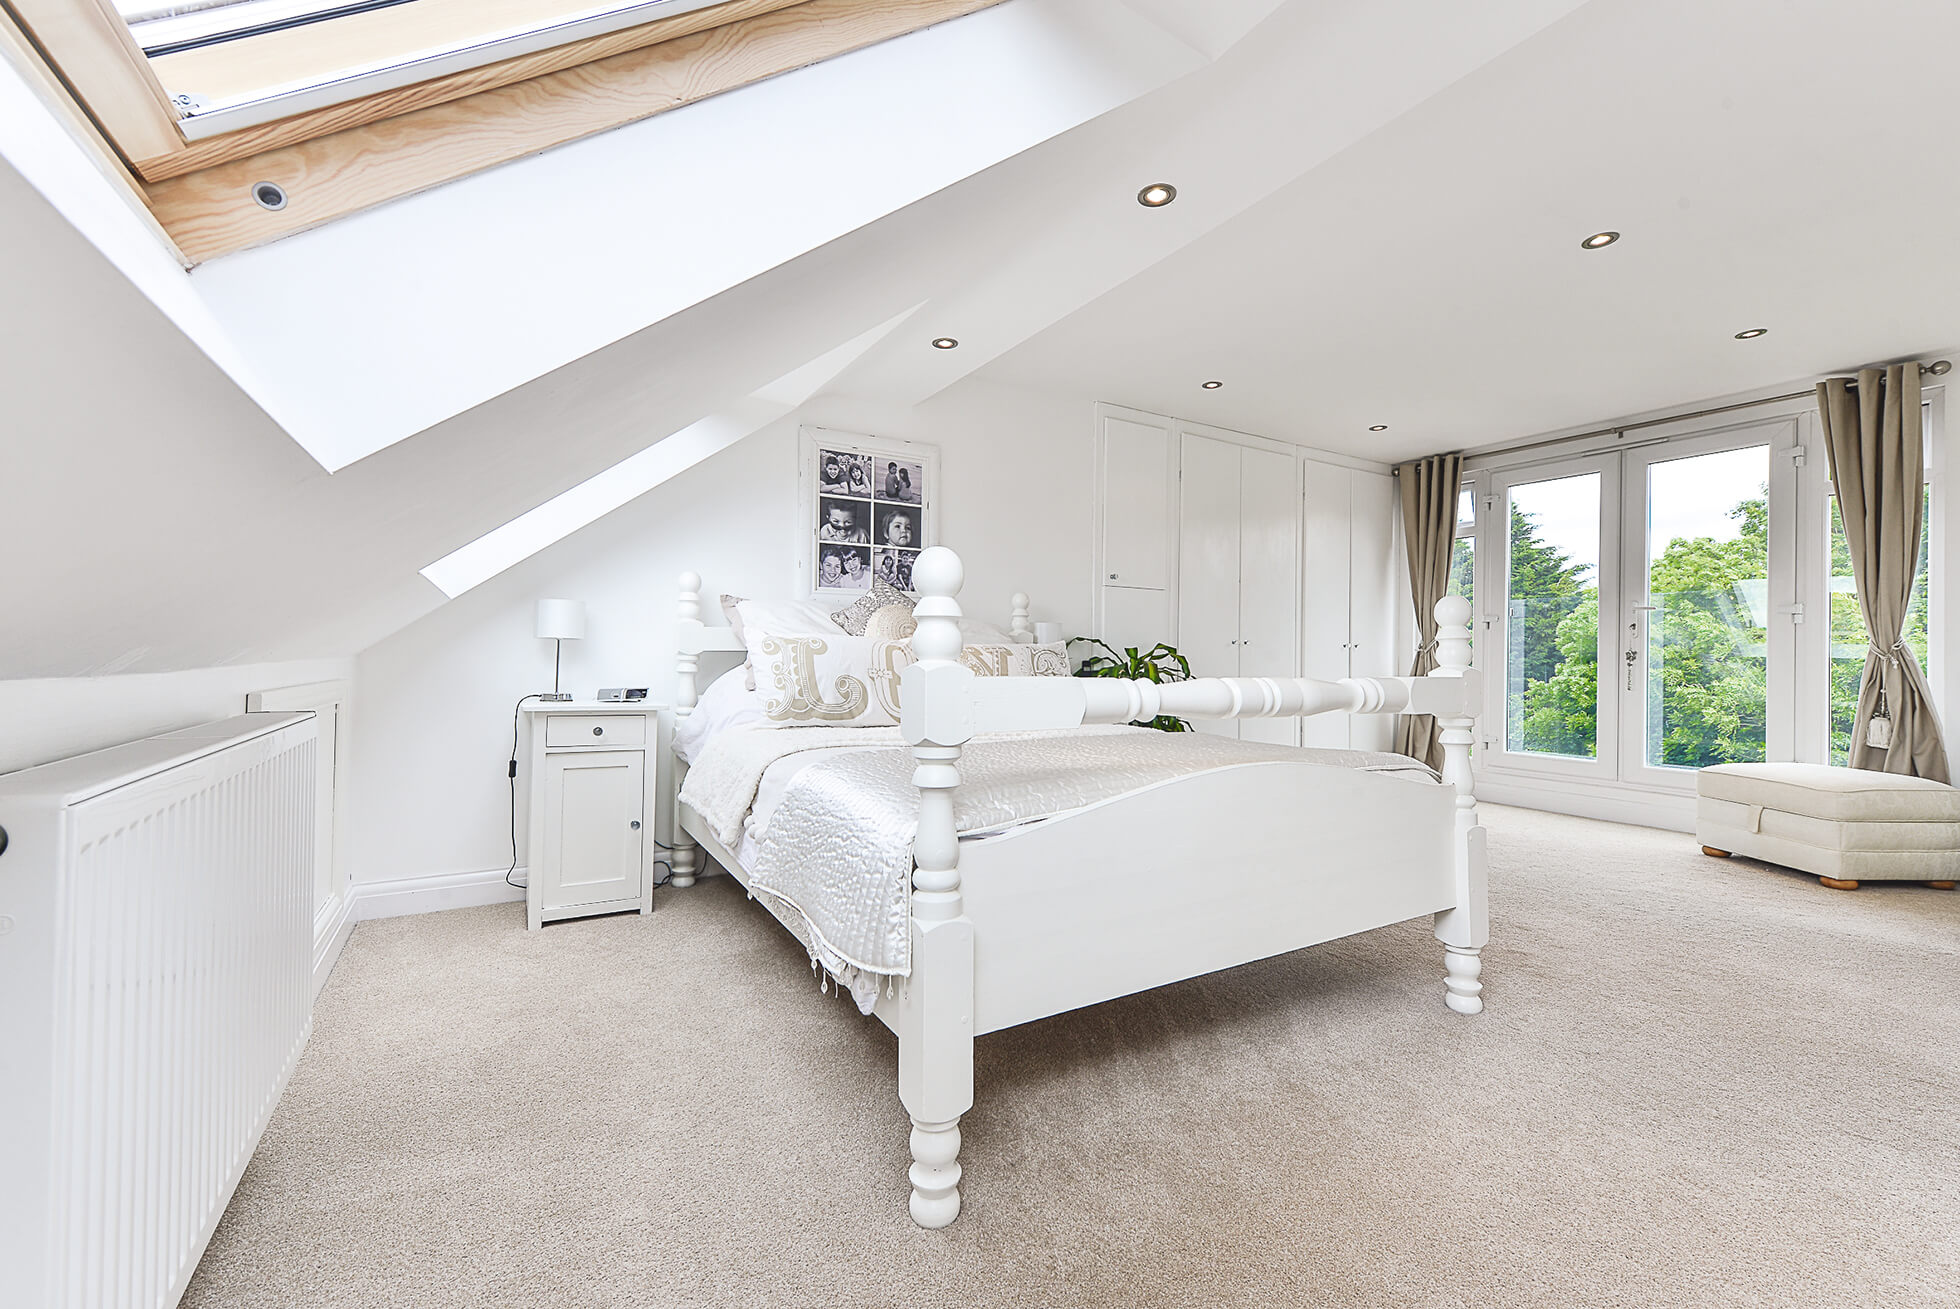 Do you have a question about converting your Loft in Great Hormead? Here are the most popular questions asked by our clients.